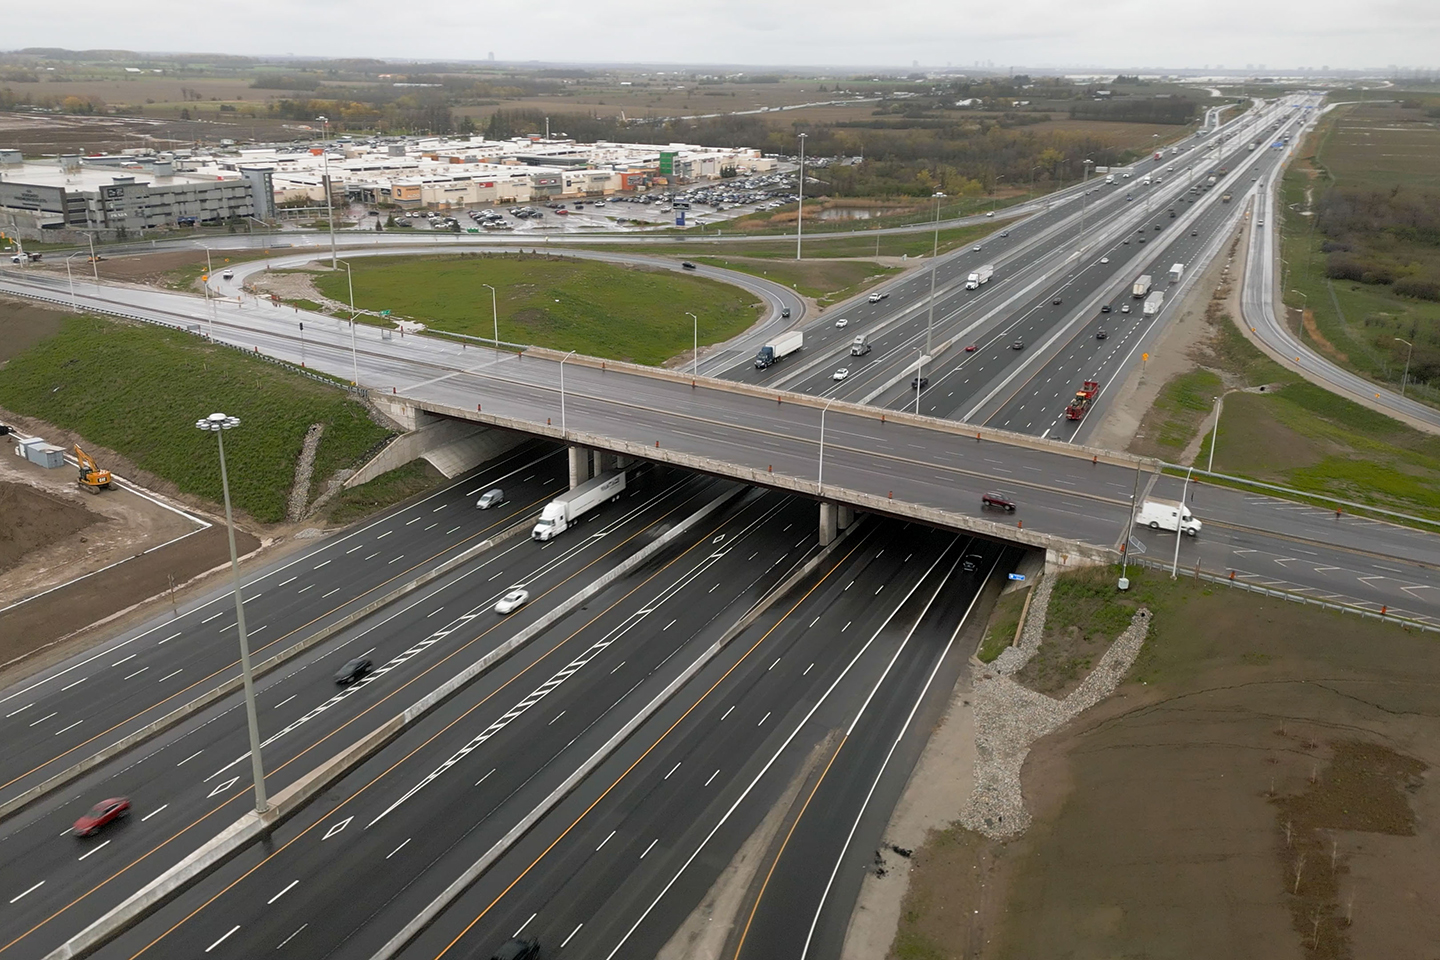 Trafalgar Road interchange with the addition of a new car pool lot